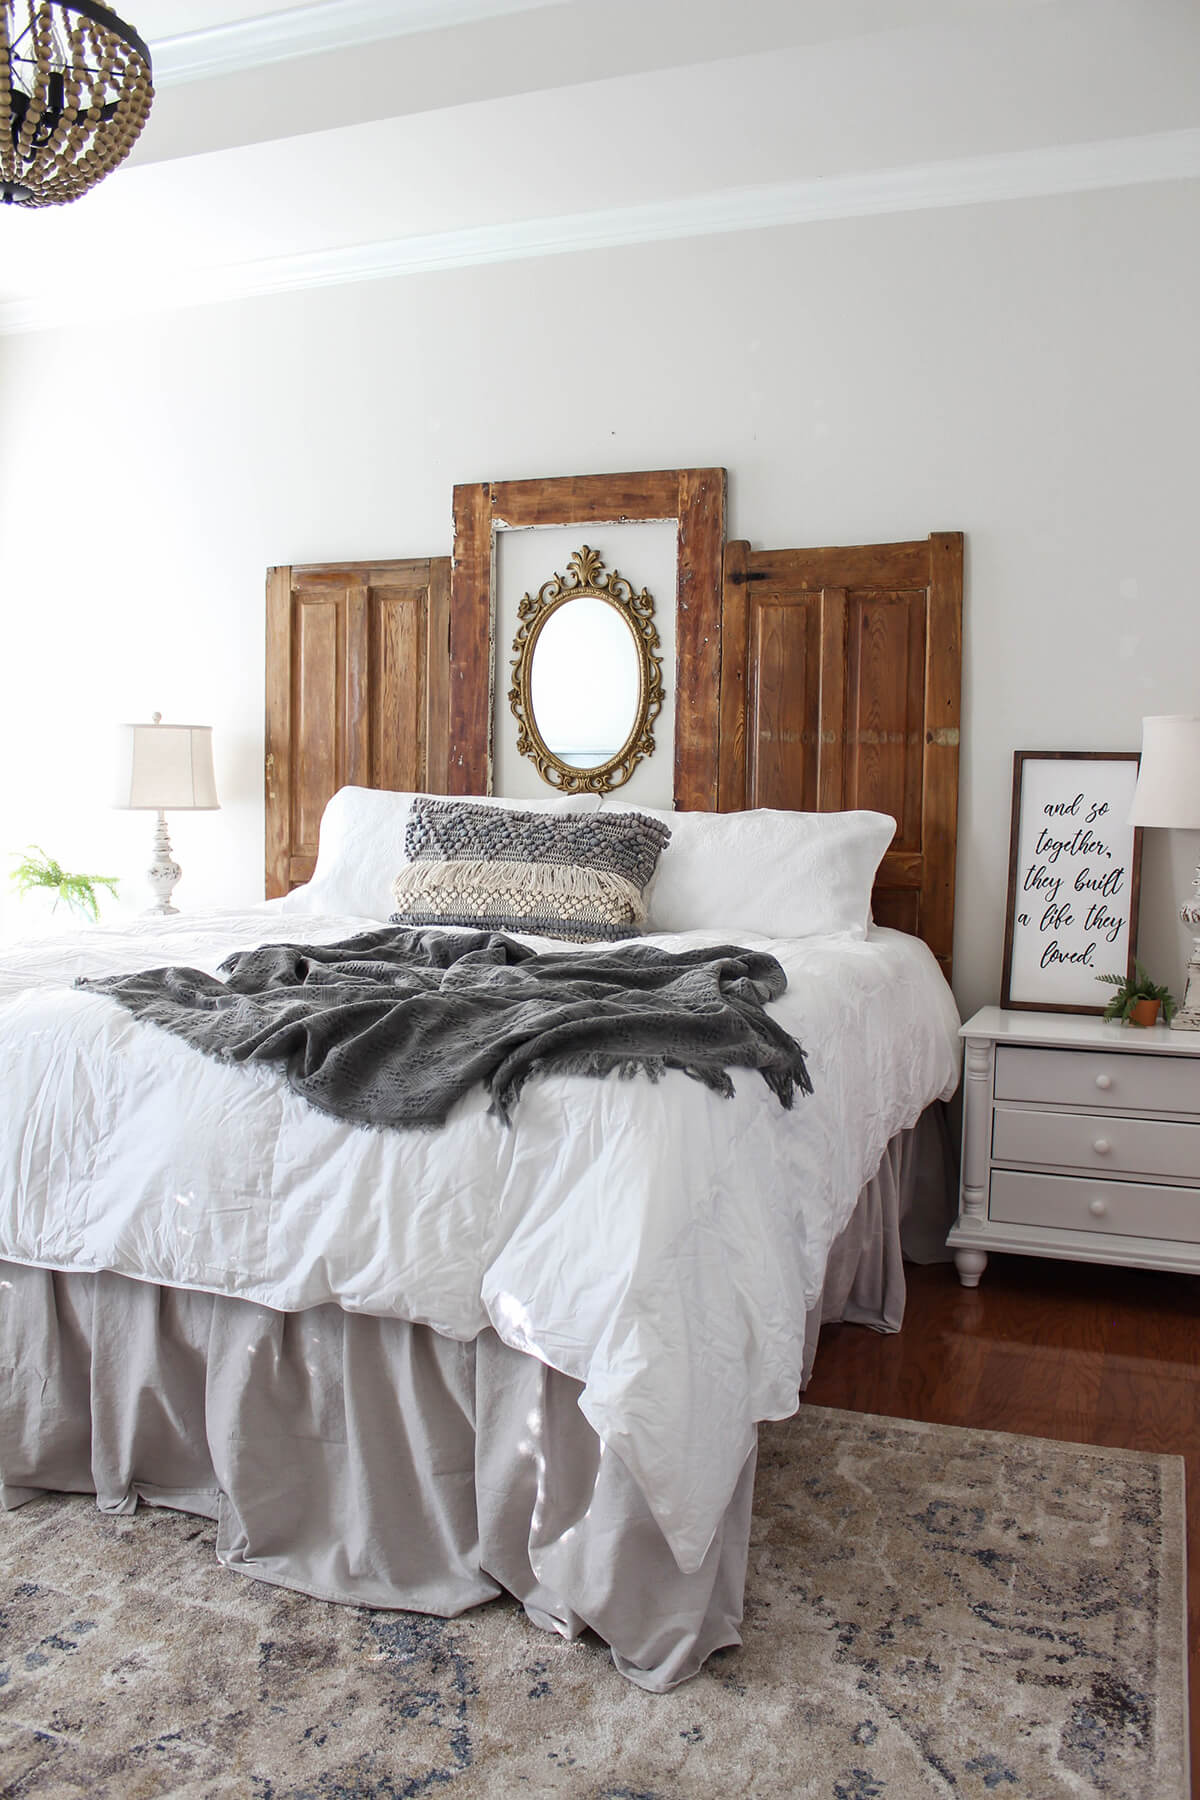 45 Best Repurposed Old Door Ideas And, How To Make A King Size Headboard From An Old Doorway